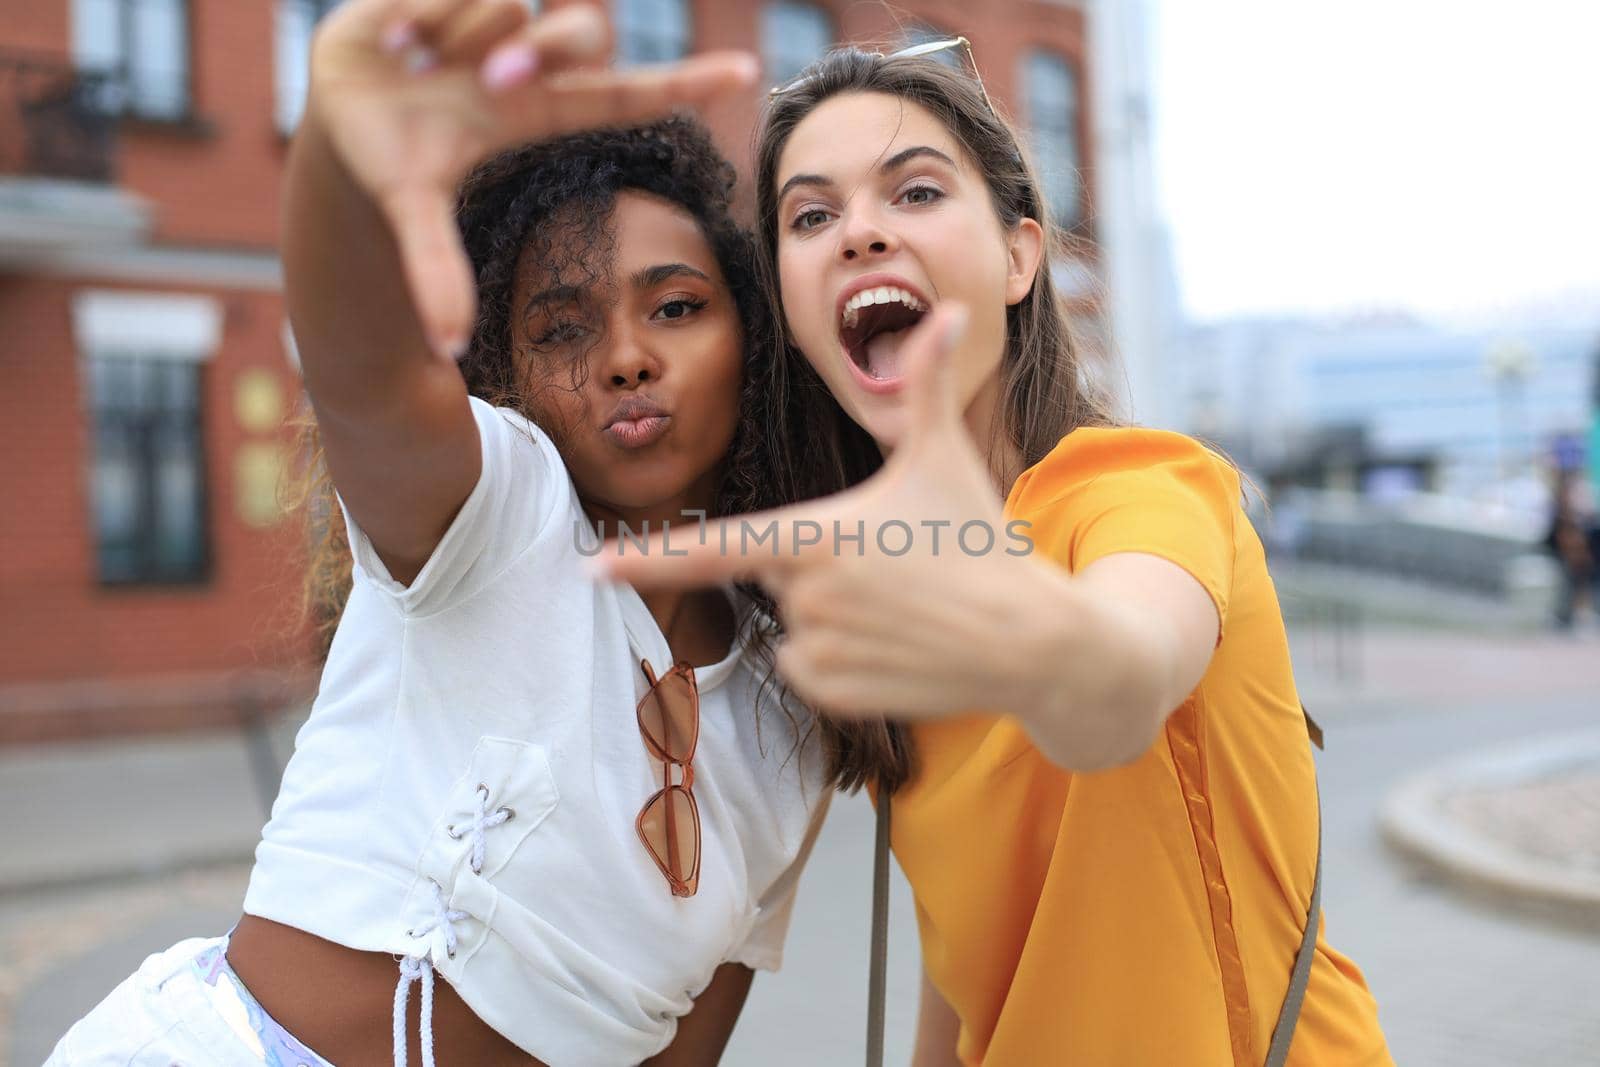 Cute young girls friends having fun together, taking a selfie at the city